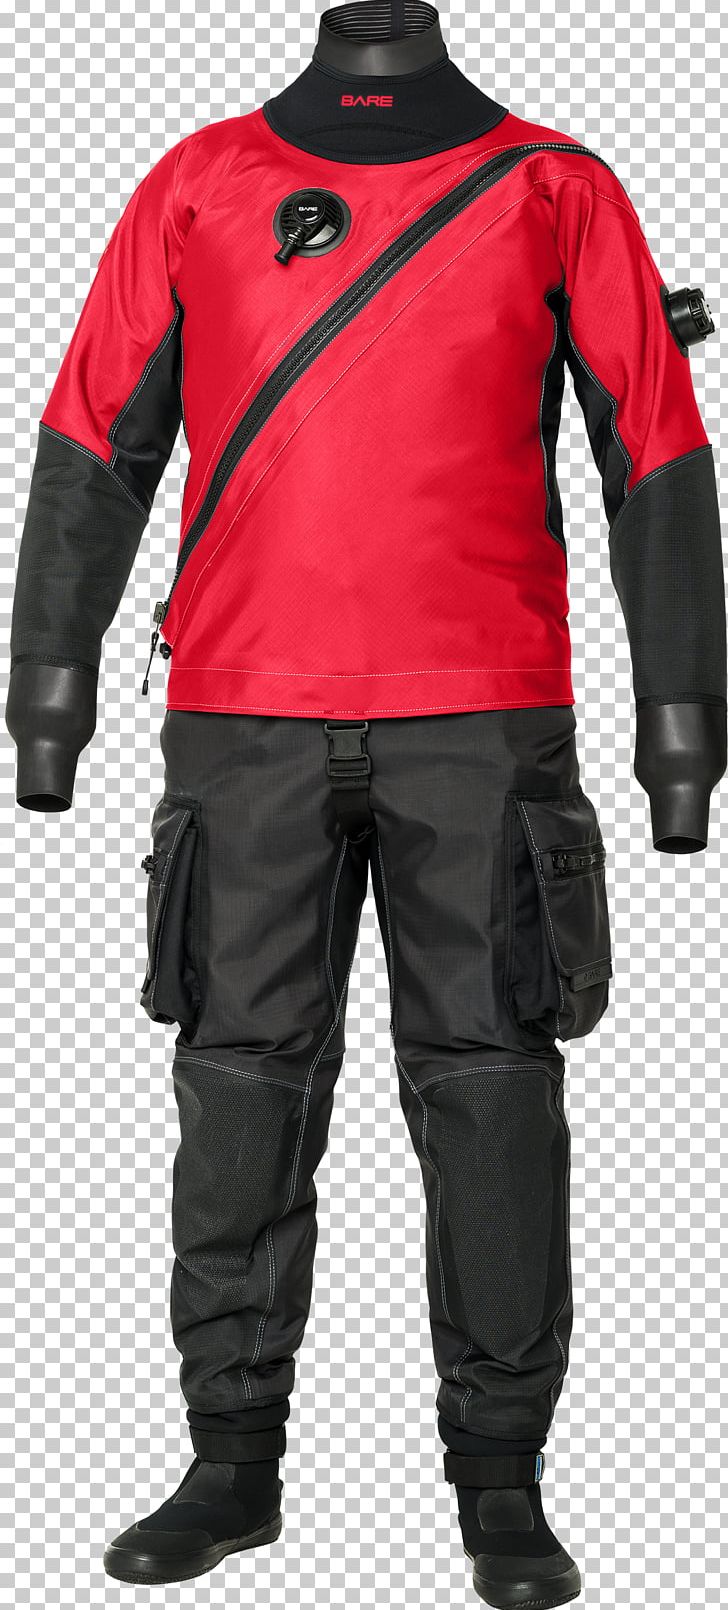 Dry Suit Technical Diving Diving Equipment Scuba Diving Underwater Diving PNG, Clipart, Bare, Cave Diving, Cordura, Diving Equipment, Miscellaneous Free PNG Download